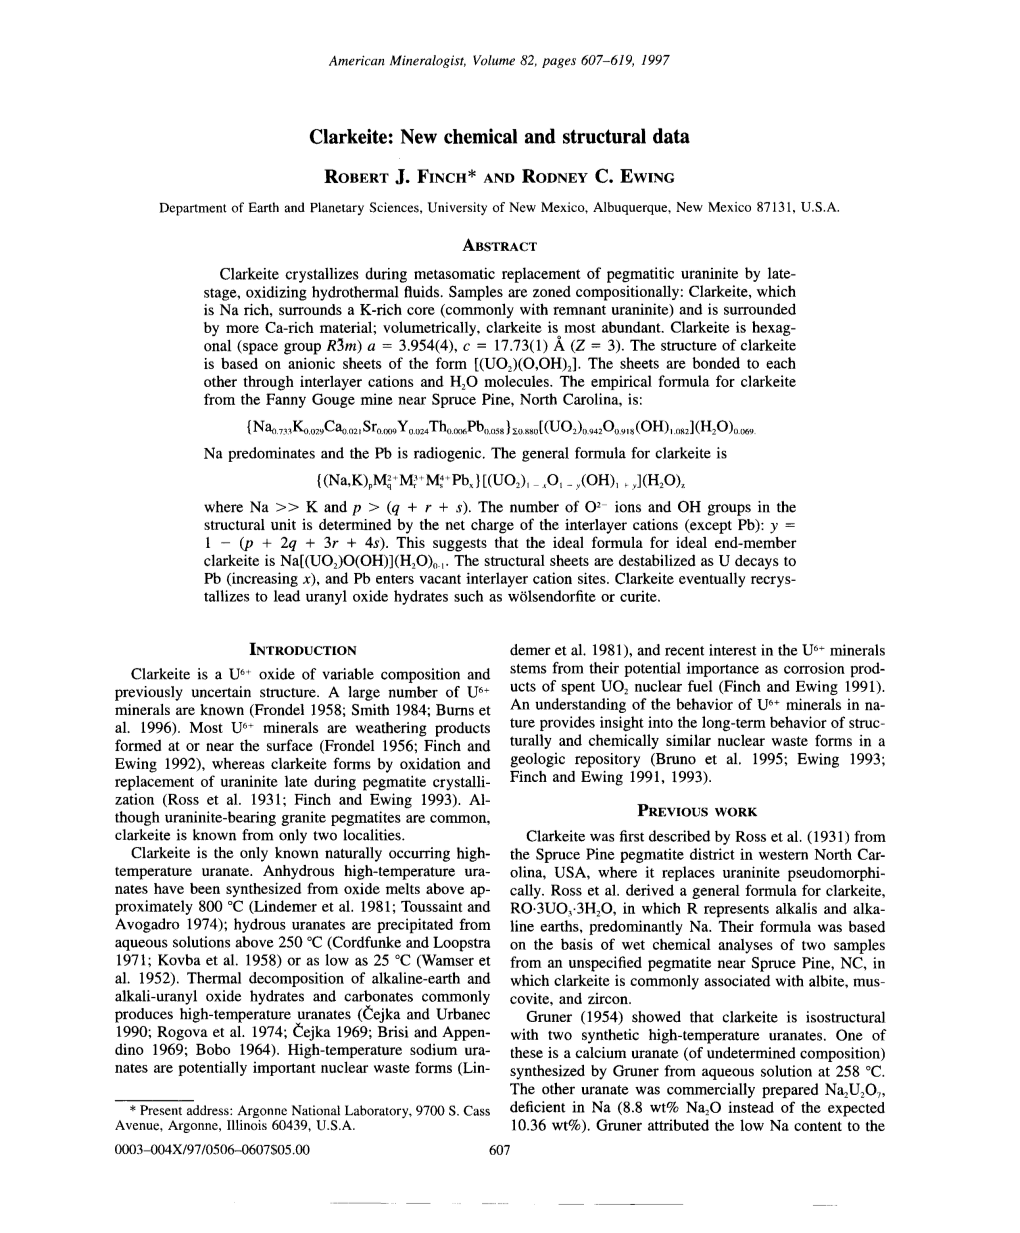 Clarkeite: New Chemical and Structural Data